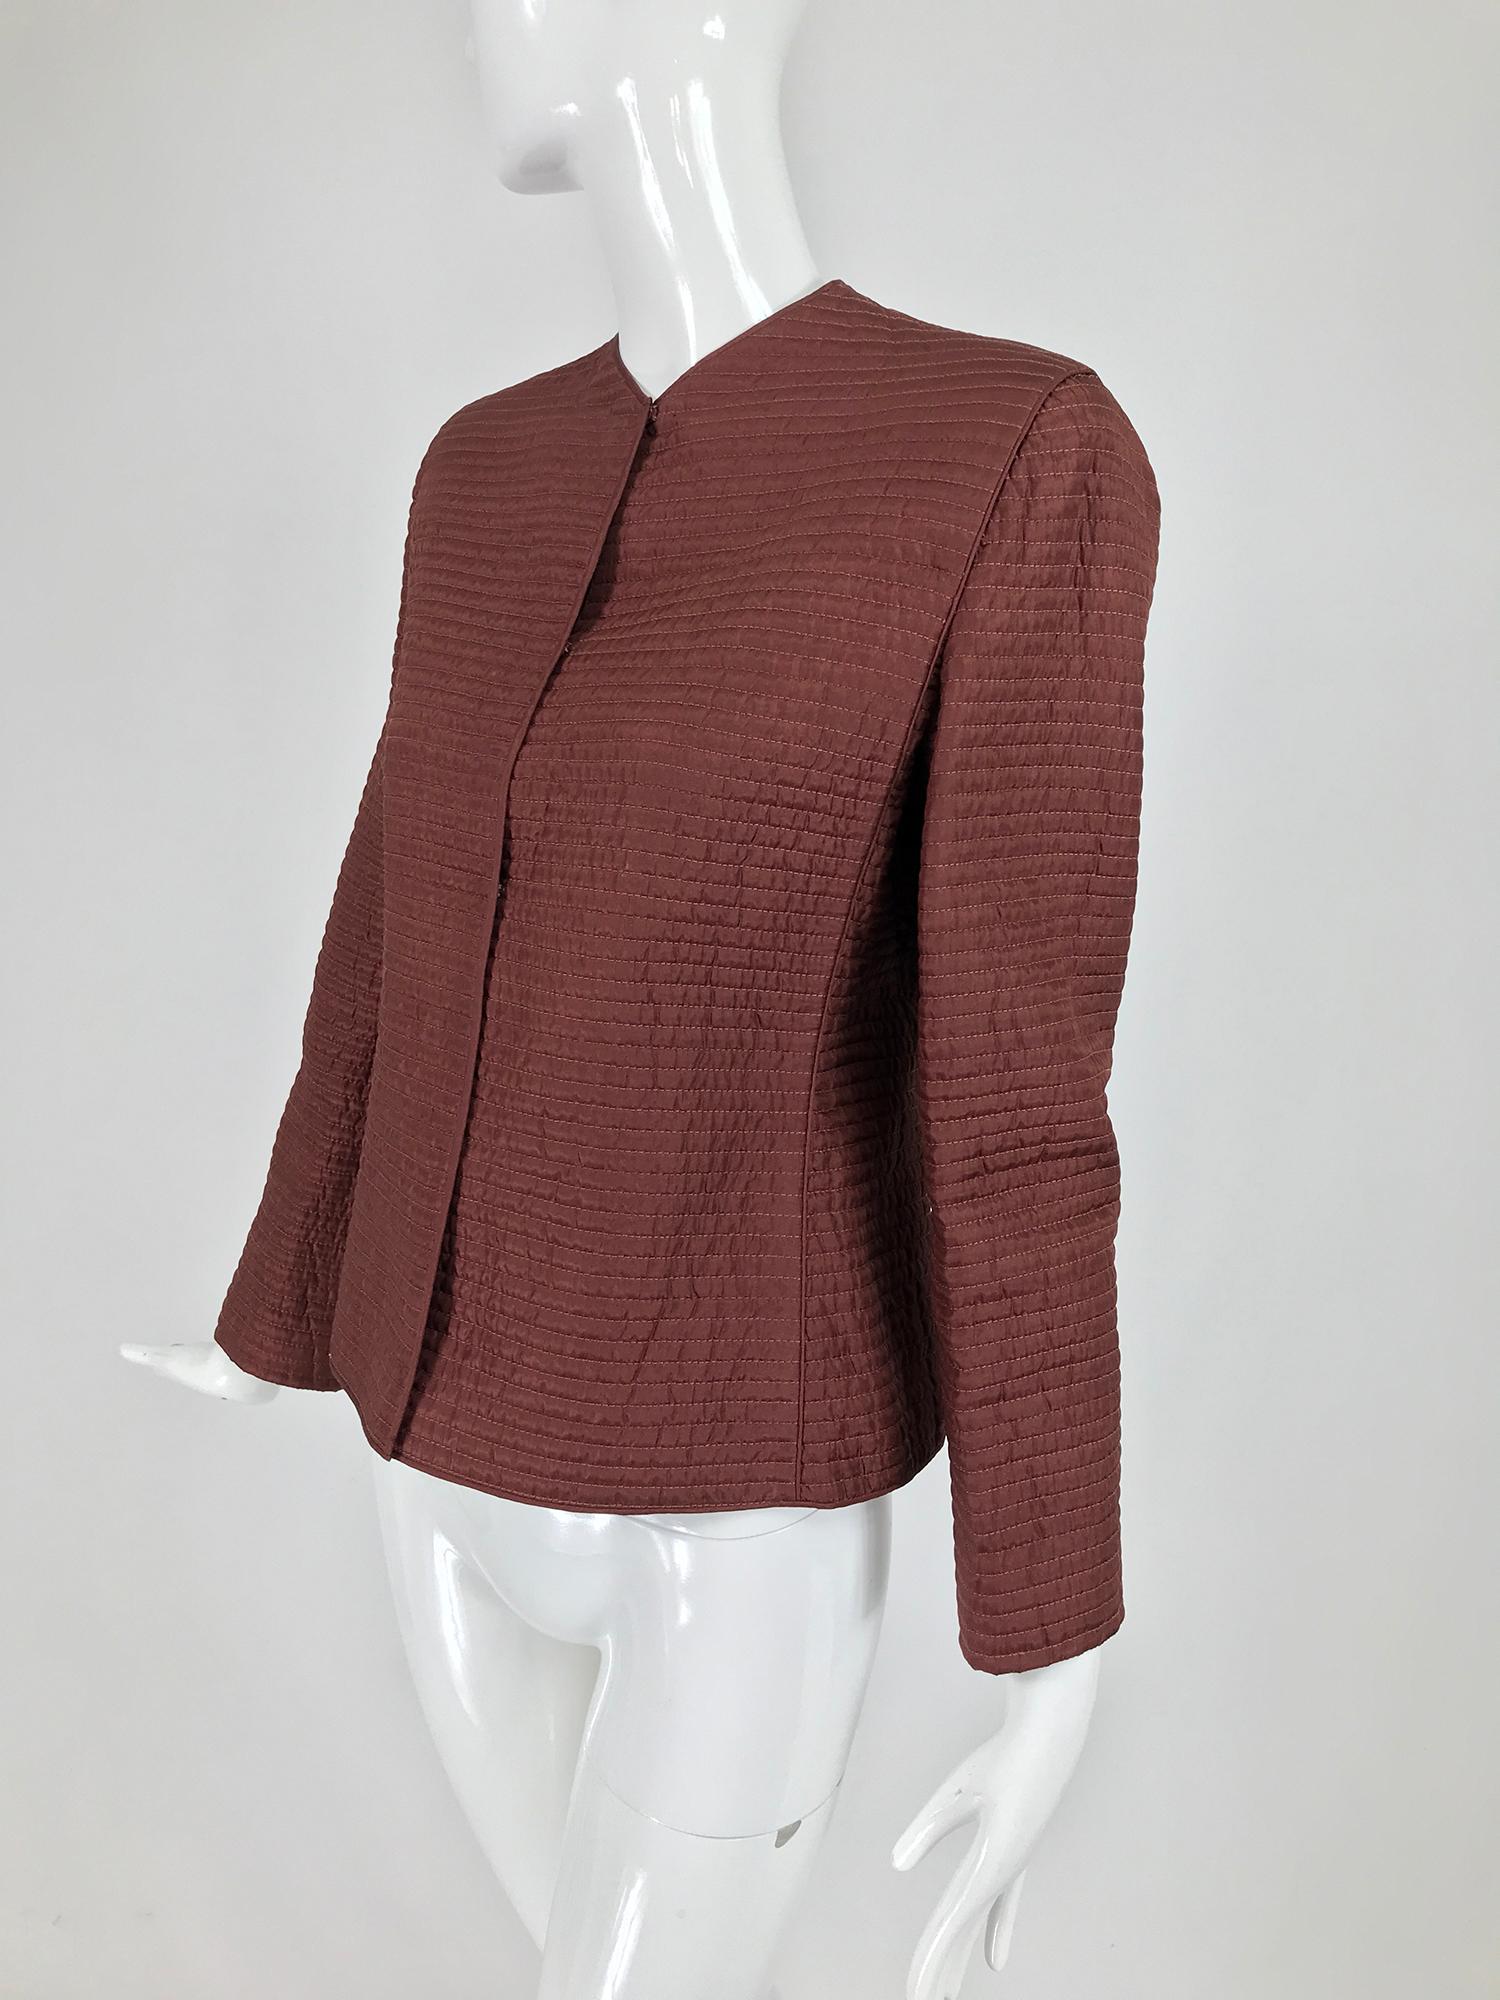 Mary McFadden Quilted Jacket in Rich Raisin Brown 1970s 6